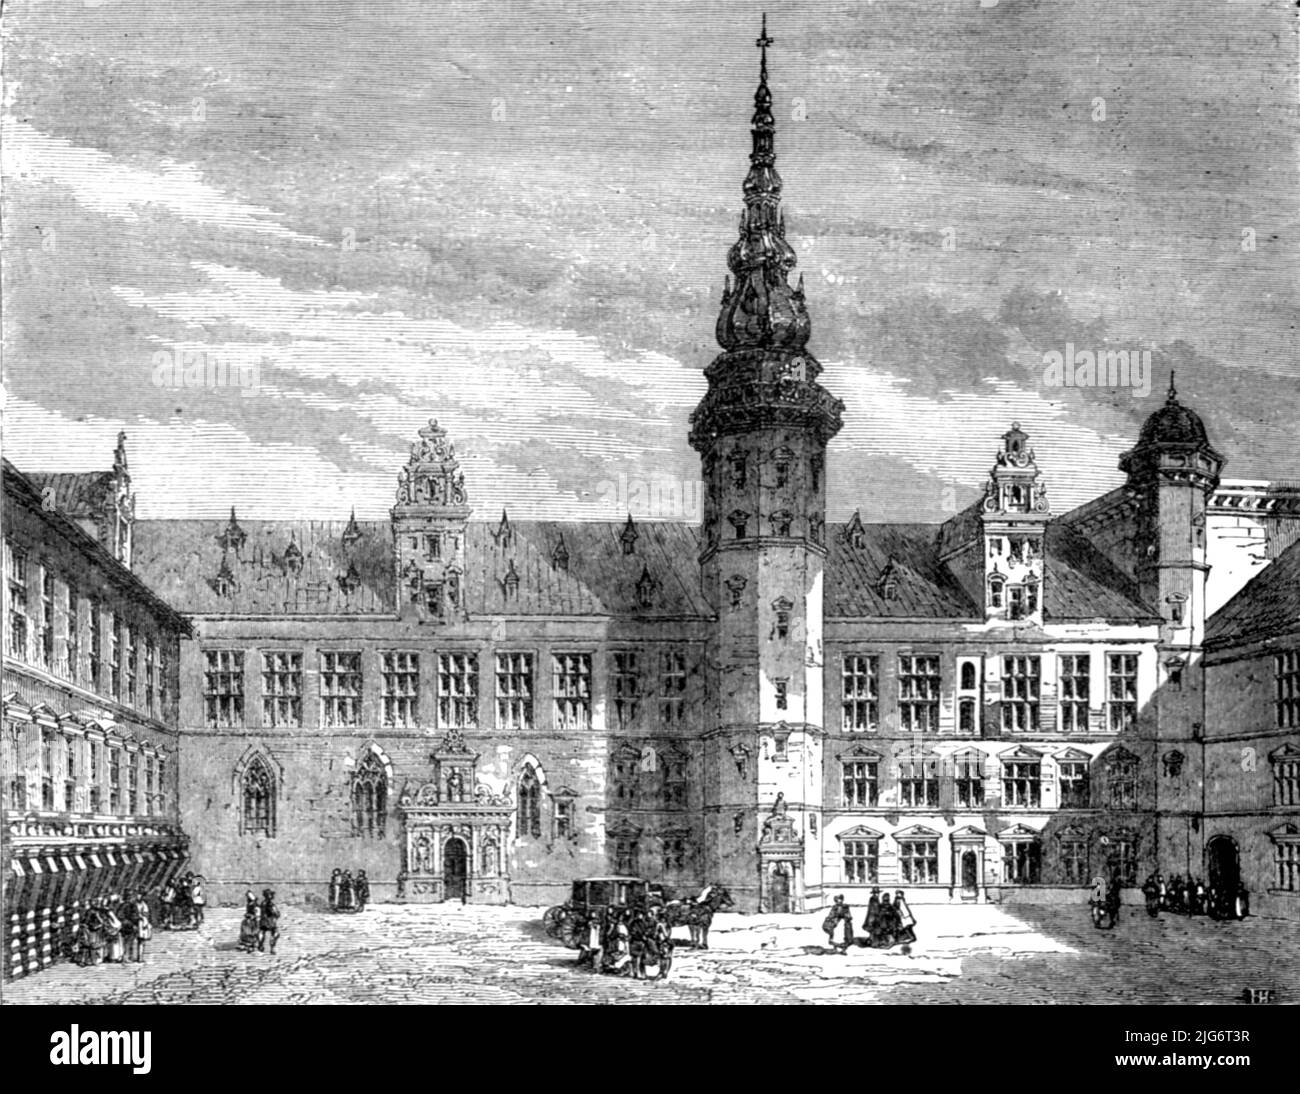 'Danish Chateau; From Stockholm to Copenhagen', 1875. [Courtyard of Kronborg Castle, near the town of Helsingor, Denmark; ('Elsinore' in Shakespeare's &quot;Hamlet&quot;]. From, 'Illustrated Travels' by H.W. Bates. [Cassell, Petter, and Galpin, c1880, London] Stock Photo